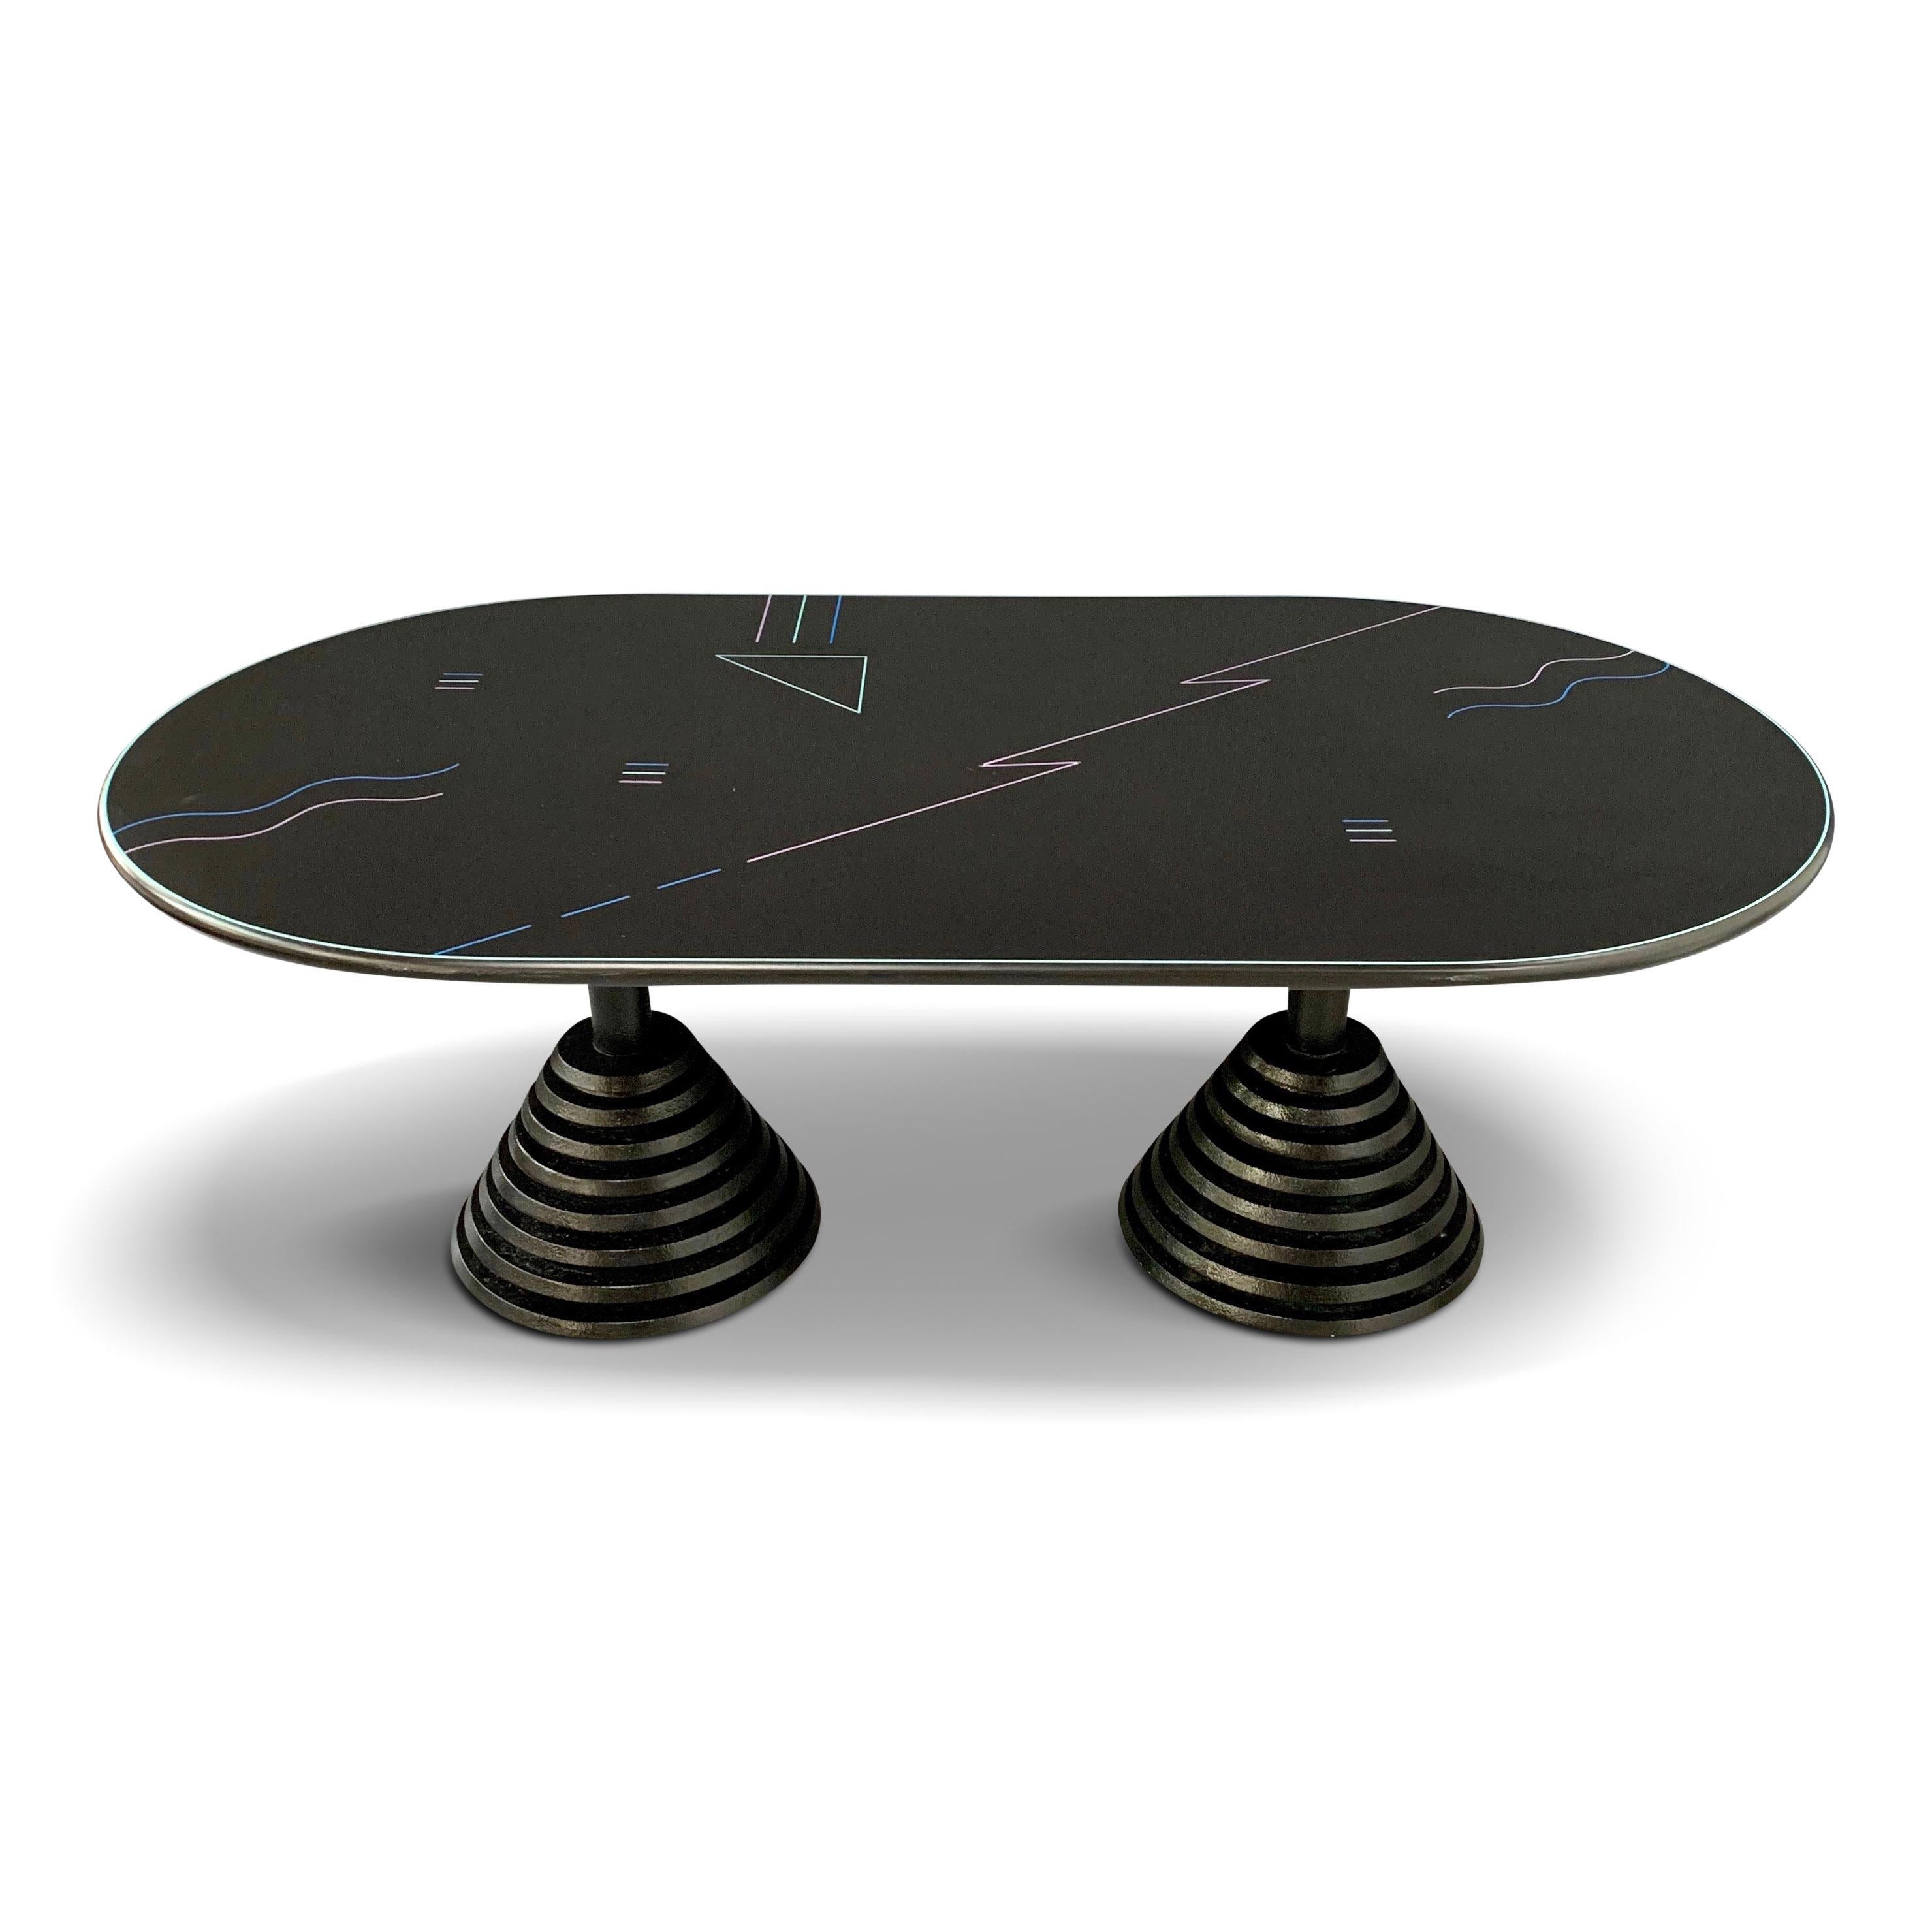 A Classic Postmodern designed desk or dining table with an inlaid colorful pattern on the top and stepped pyramid shaped legs.